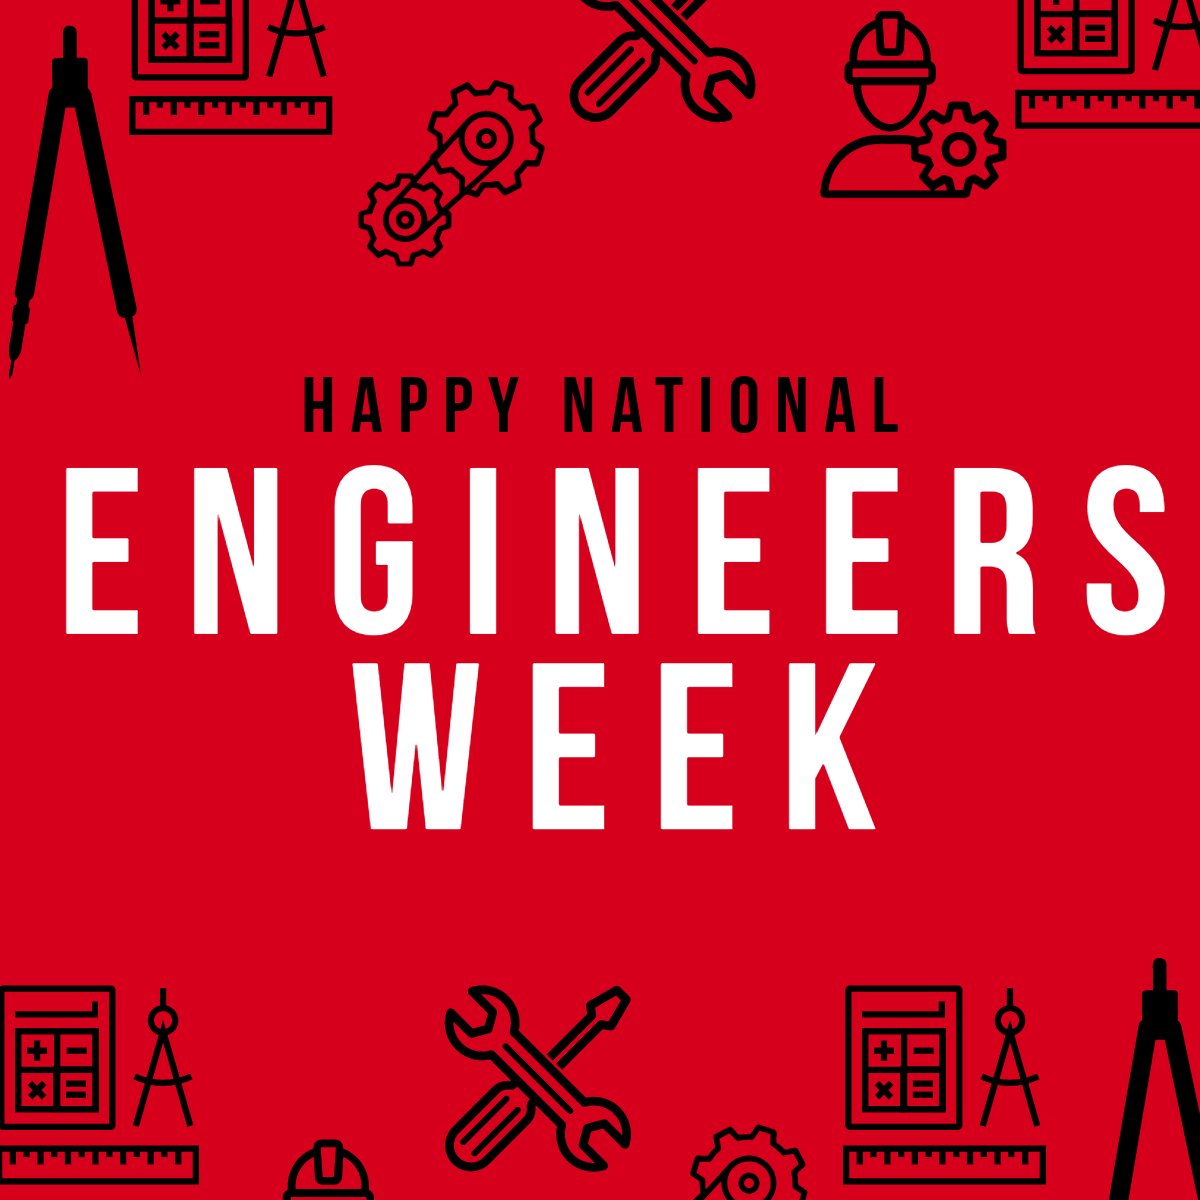 To our RPI engineers, keep on changing the world! 🌎

#NationalEngineersWeek #RPI #RPIAlumni